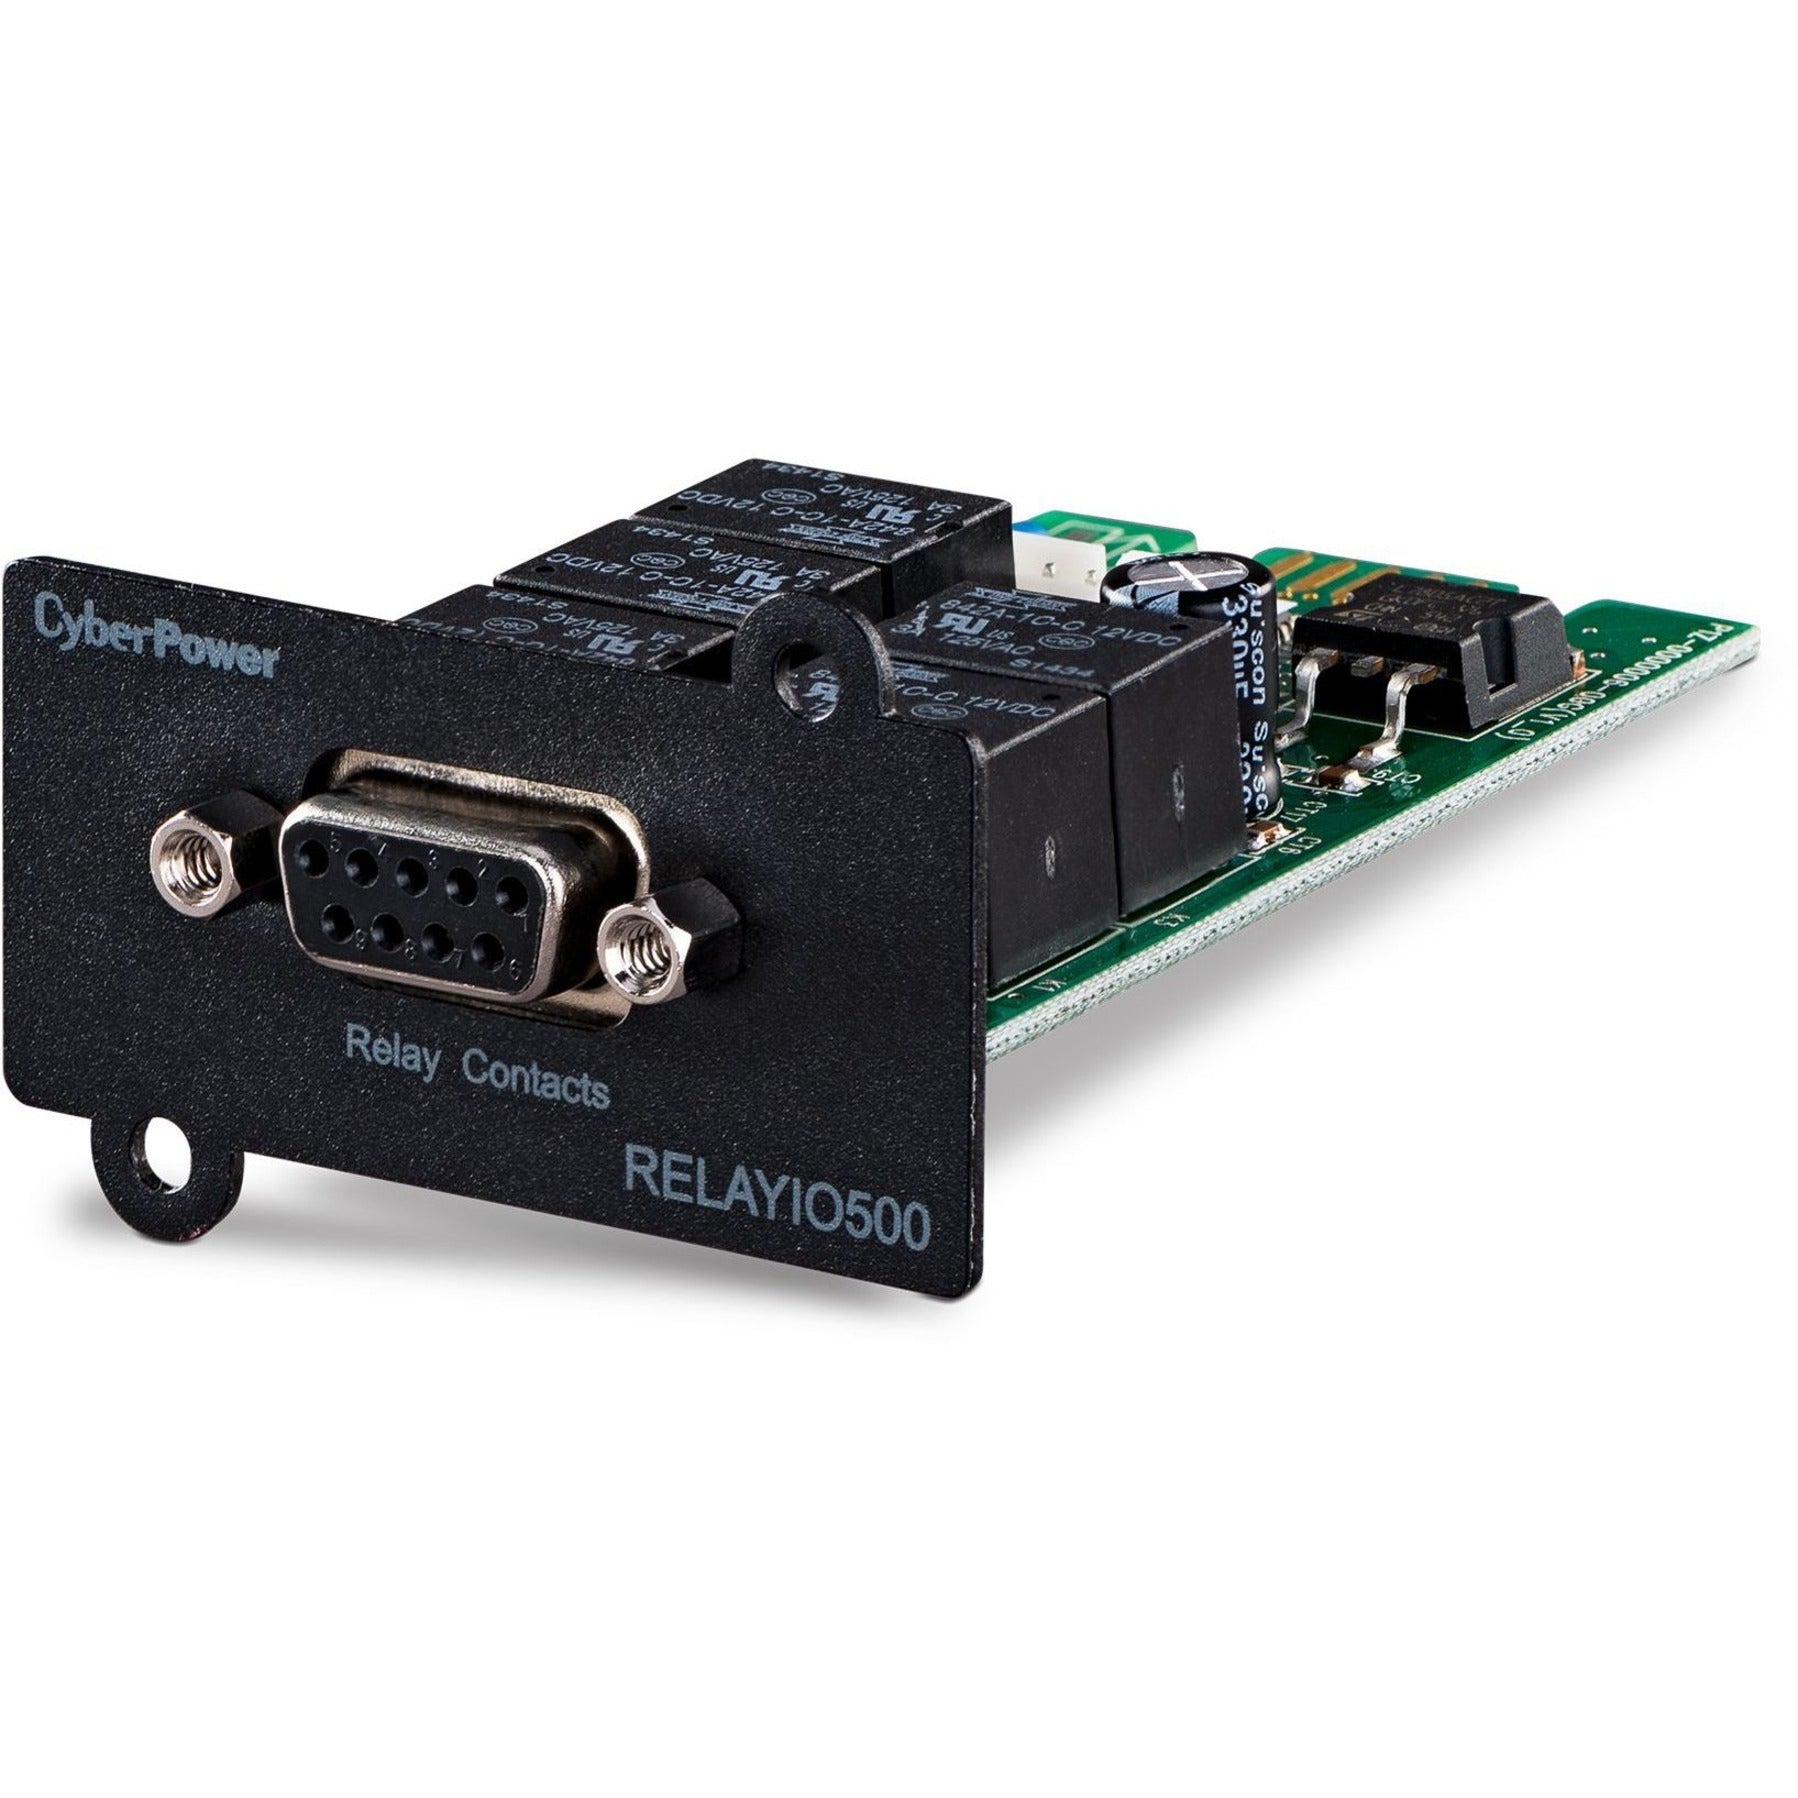 CyberPower RELAYIO500 Remote Power Management Adapter, 3 Year Warranty, Serial Interface